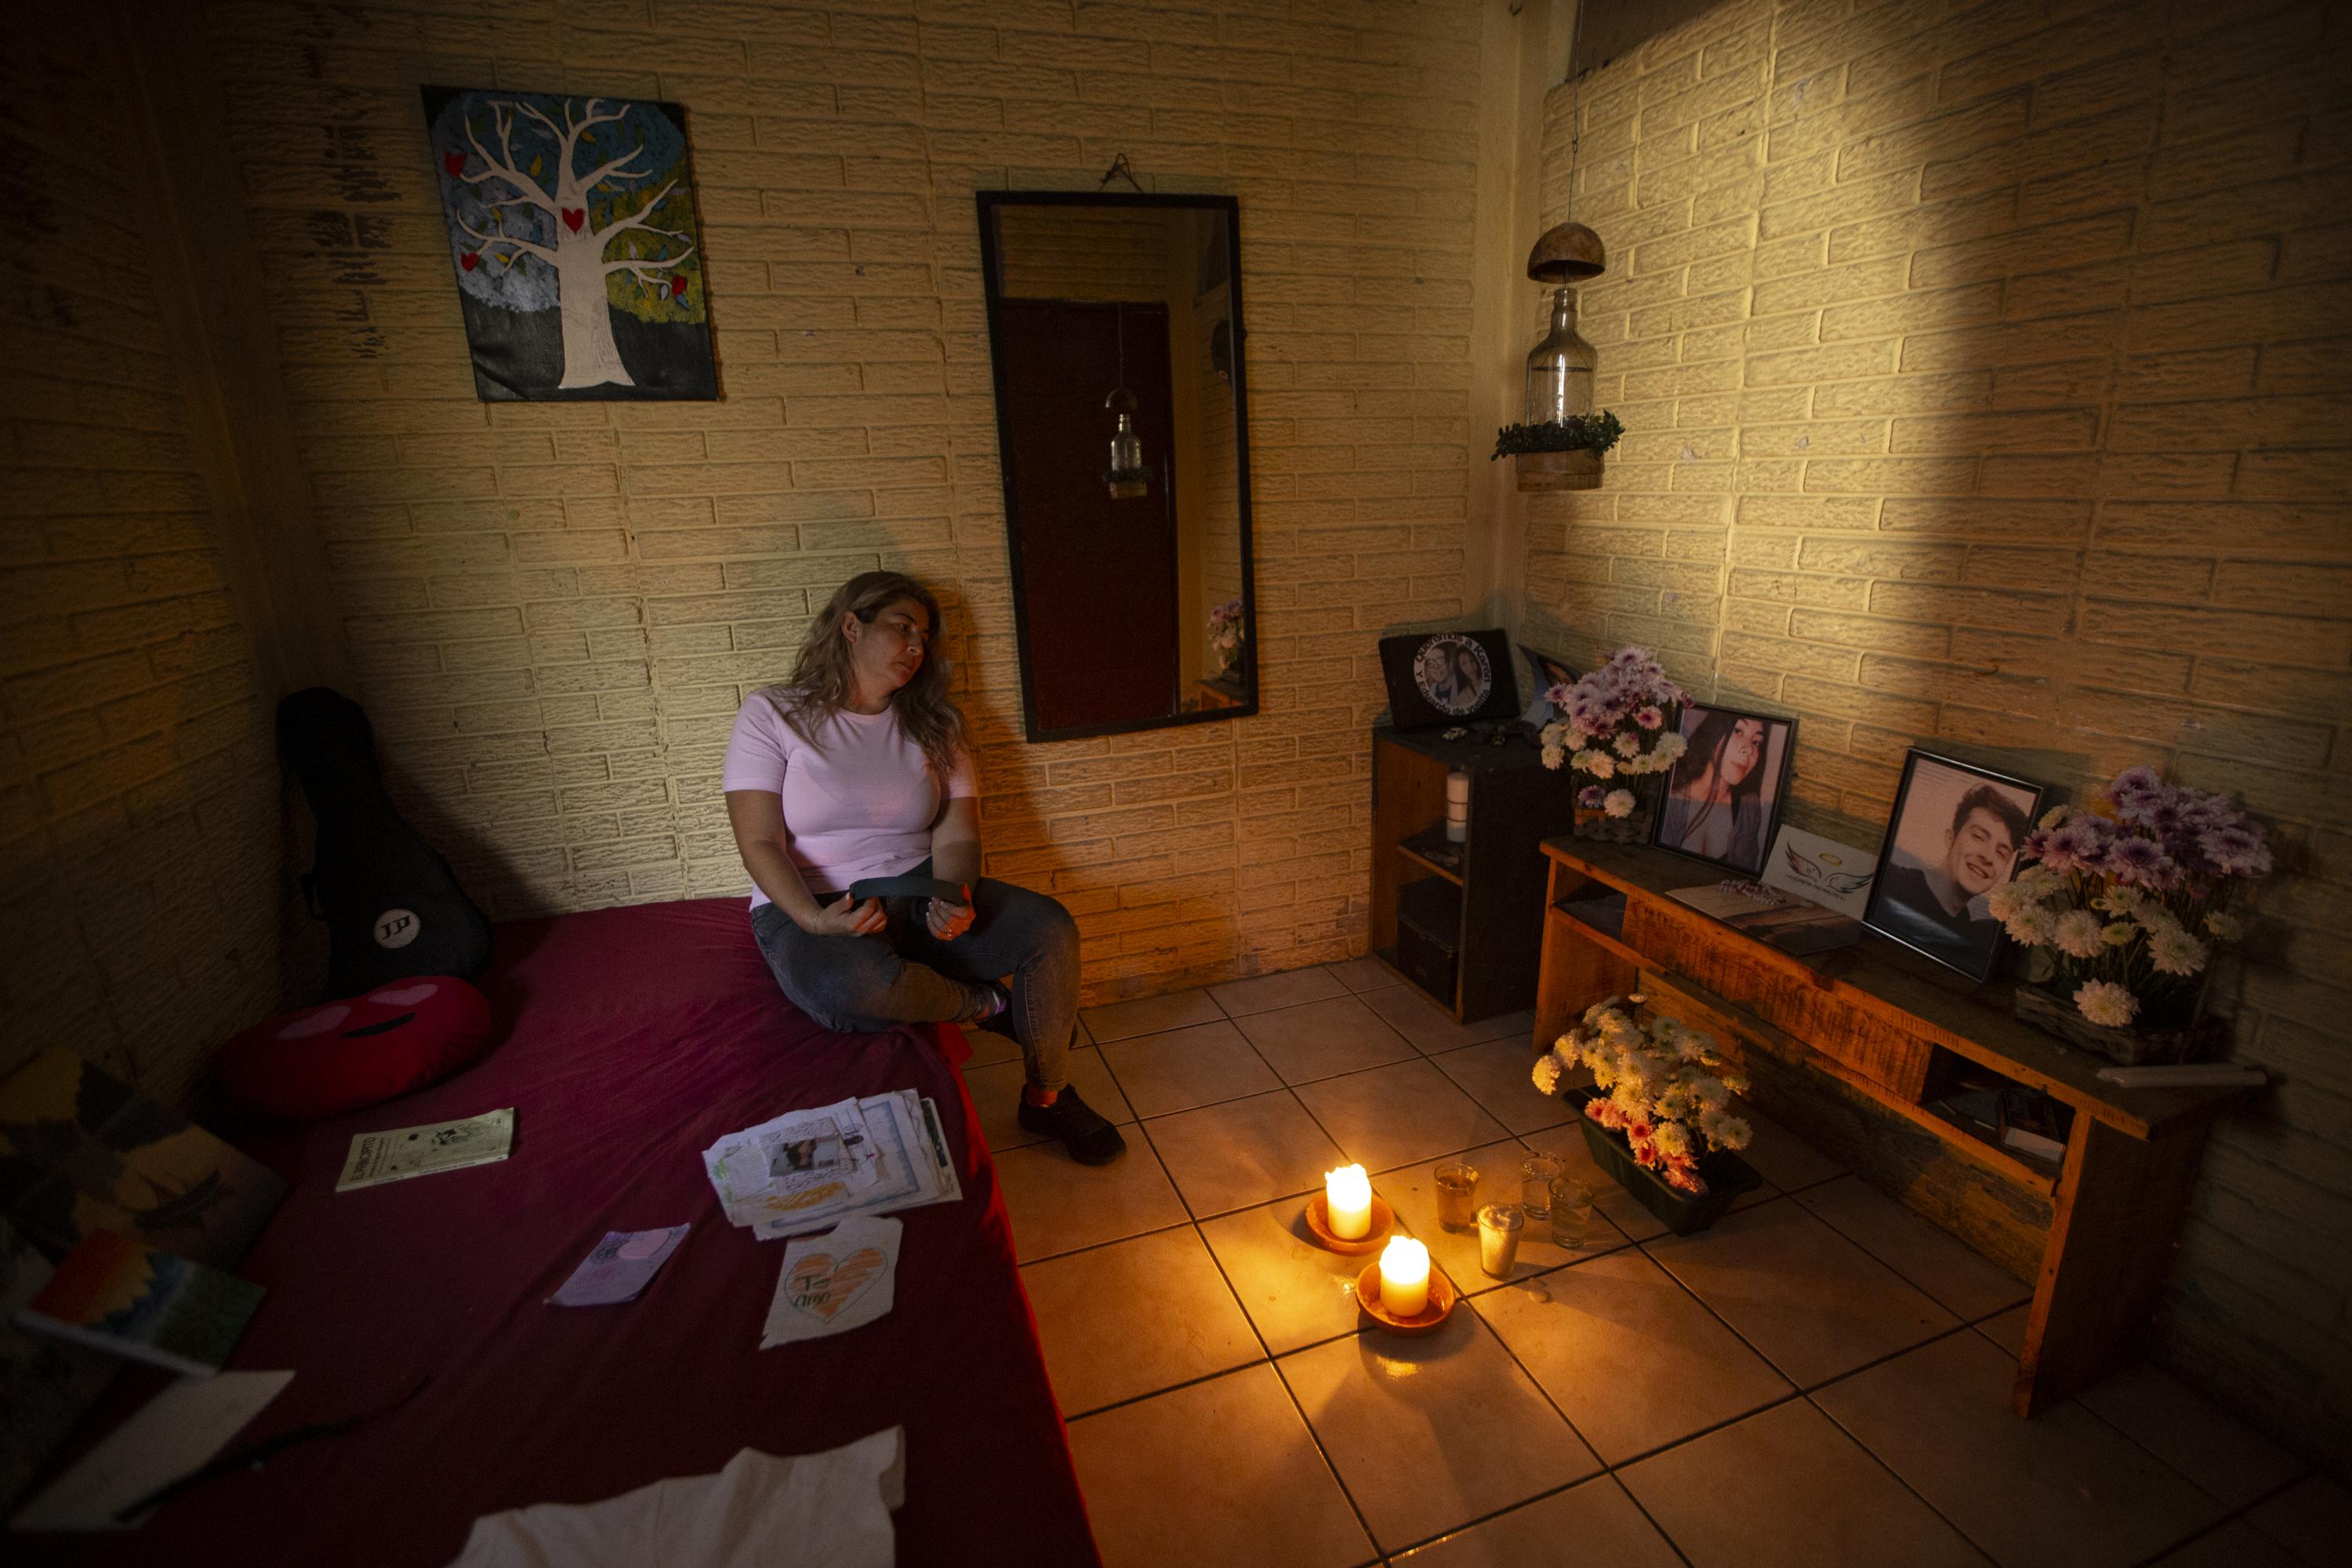 On Sep. 18, 2021, Ivette’s two children, Karen and Eduardo Guerrero, were kidnapped in the Quezaltepec neighborhood of Santa Tecla. She searched for 98 days until their bodies were found on December 23 in a clandestine cemetery in the neighboring municipality of Nuevo Cuscatlán. The case was widely covered by the media. “Officials do not consider the harm they cause,” Ivette says. “For many, my children died because they were gang members and drug traffickers, because that’s the message from the government and from [Security Minister] Gustavo Villatoro.” She says the government politicized her case, which is why she decided not to pursue it with a defense lawyer. She only knows what the prosecutors tell her, because the Attorney General’s Office has declared the case confidential. Ivette, pictured here gazing at an altar in her children’s bedroom, fled El Salvador a few months ago and prefers not to name the country that granted her asylum, where she works in a public hospital kitchen. “After I found my children, the government backed me into a corner. I was not safe anywhere,” she says. “I felt something might happen to me, and not from the gang members who controlled my neighborhood, but because of the attacks from the government to tarnish their image. At least I’m not living in fear anymore. But coming here doesn’t fix my life. It’s hard to survive here too.” Photo by Víctor Peña.